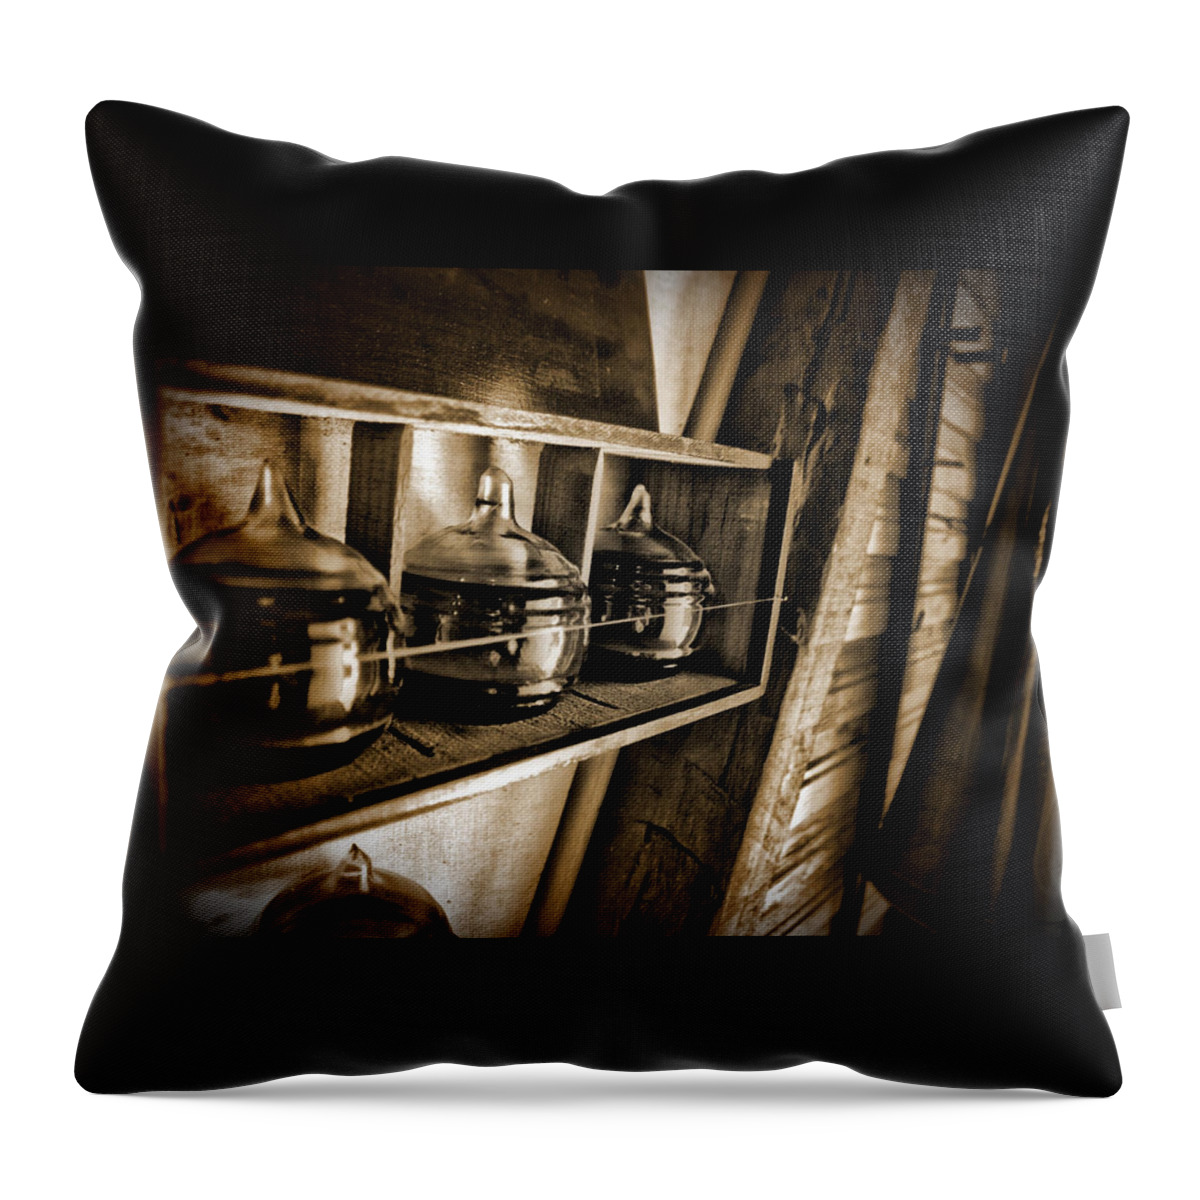 Fireman Throw Pillow featuring the photograph Fire Extinguisher by Richard Gehlbach